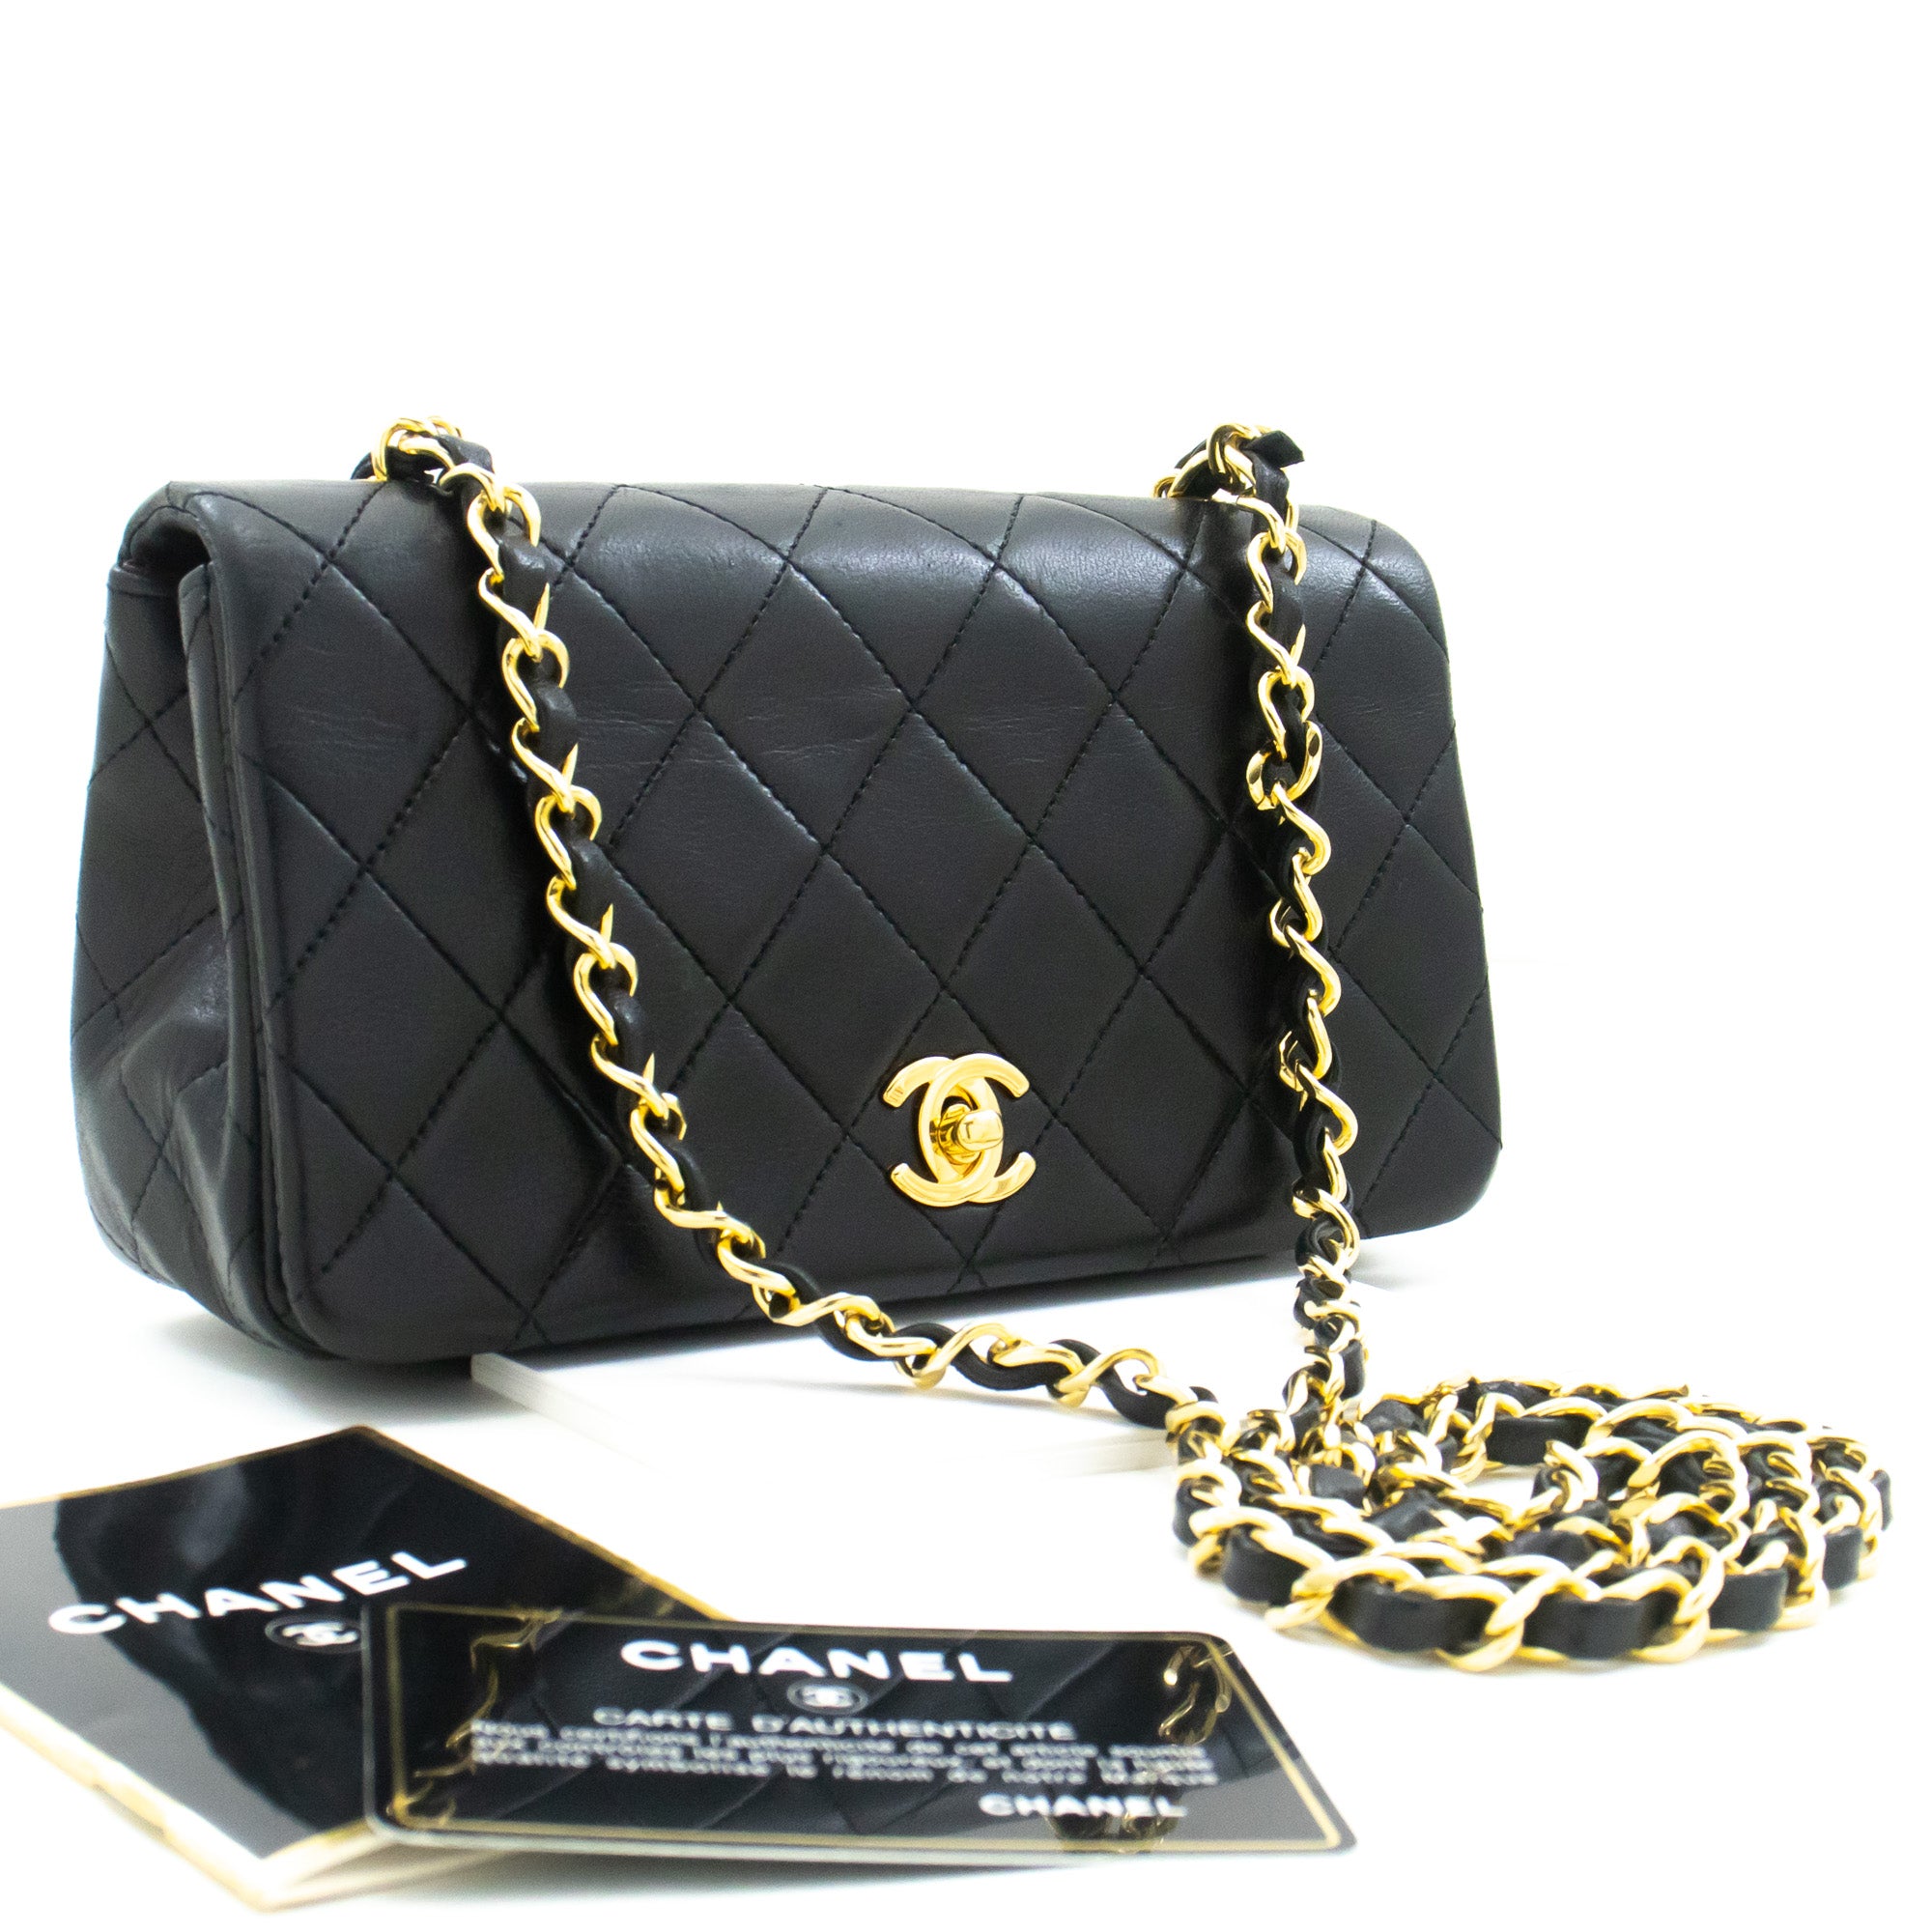 CHANEL Zip Women's Bags & CHANEL Boy, Authenticity Guaranteed